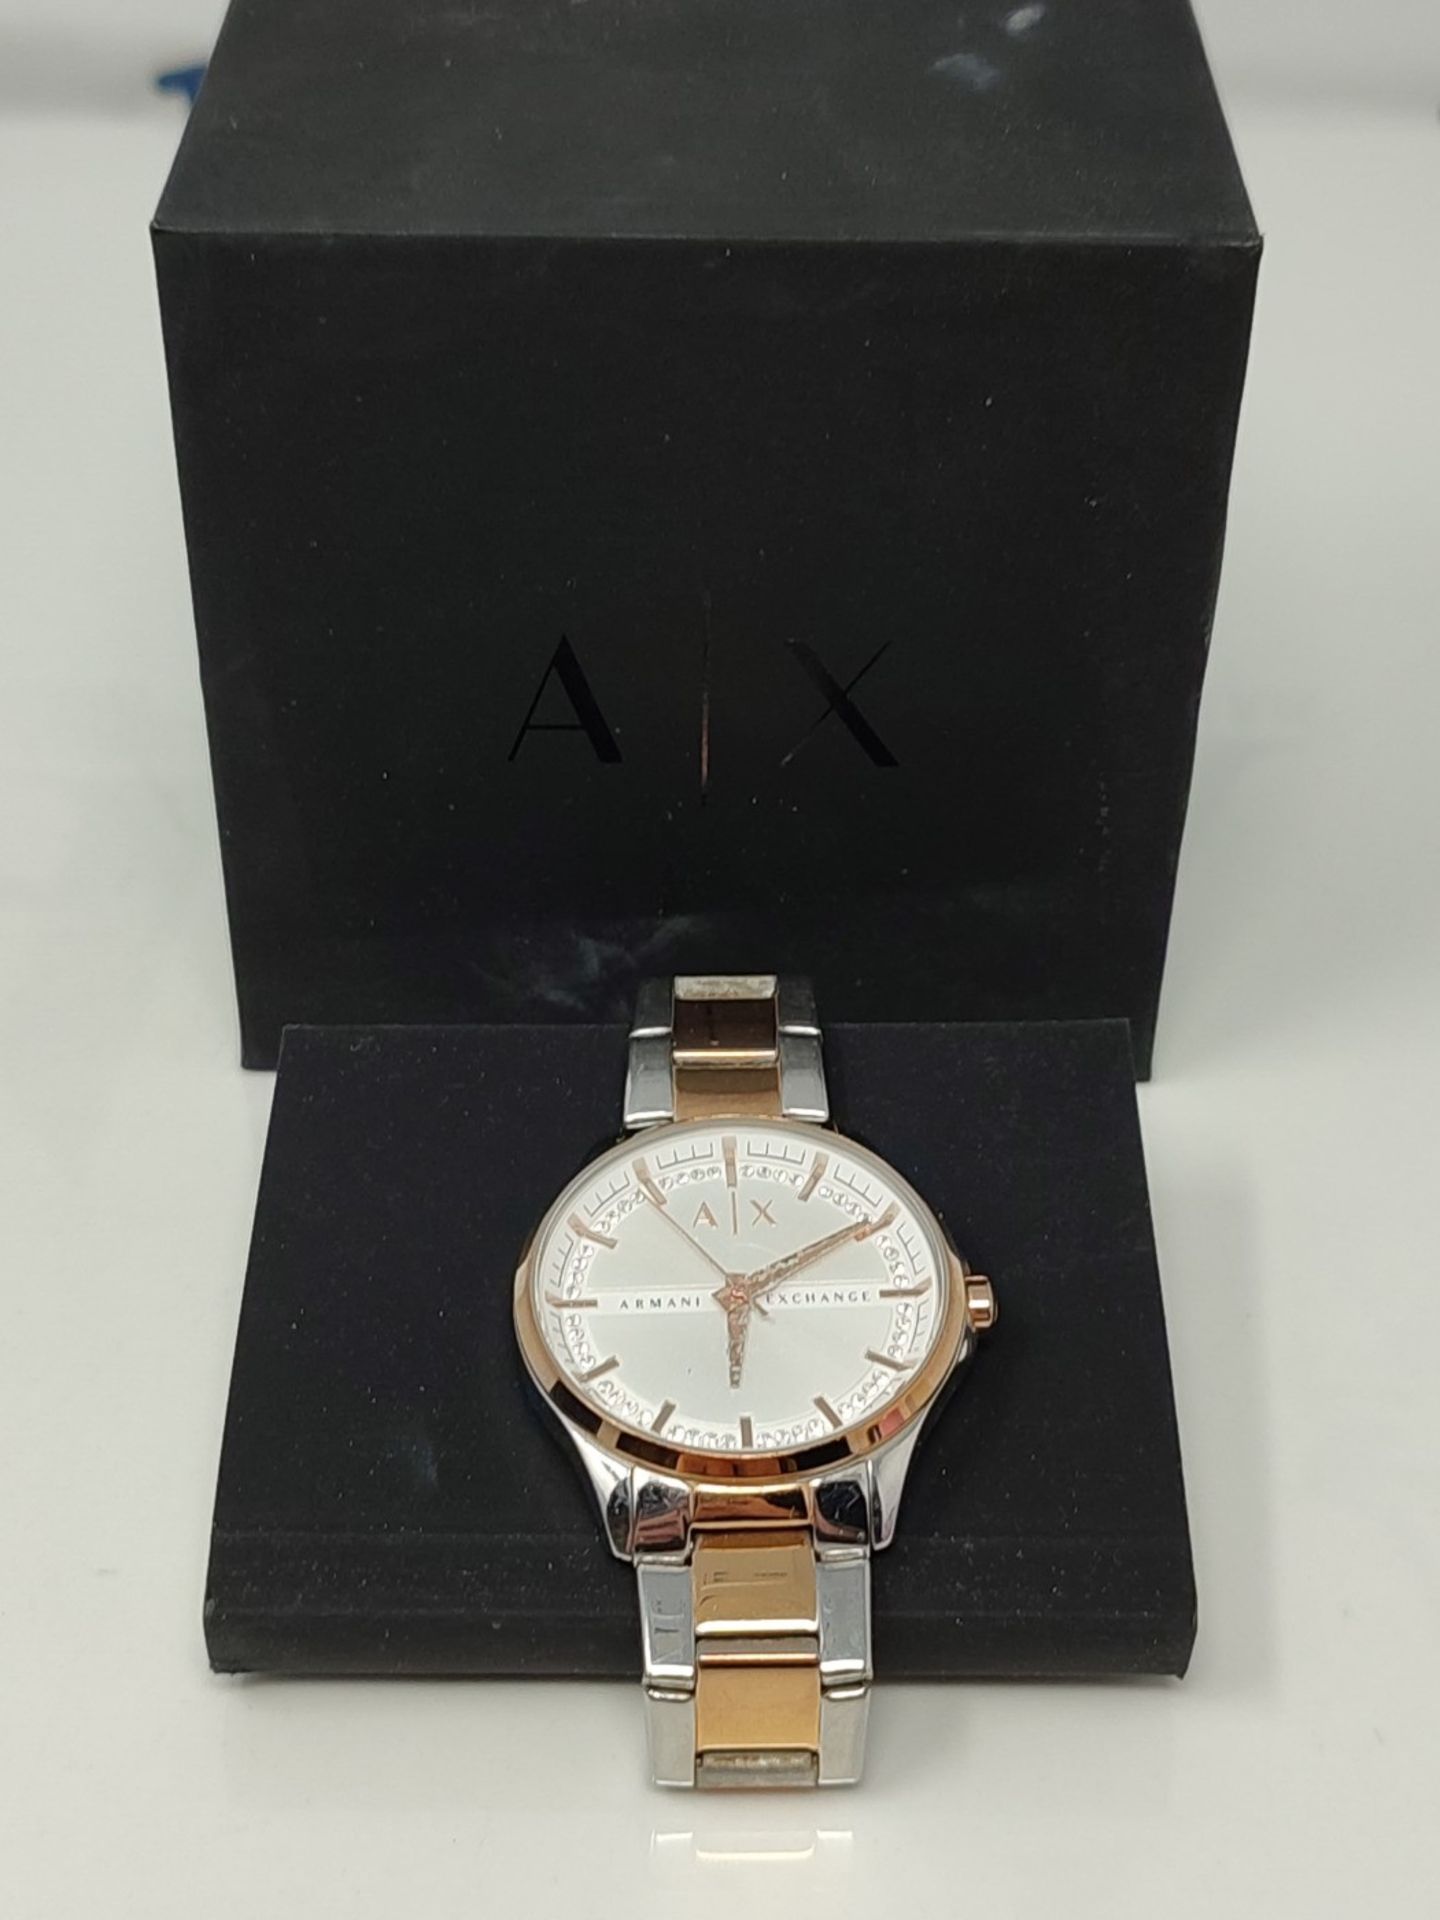 RRP £169.00 Armani Exchange Women's Three-Hand, Stainless Steel Watch,36mm case size - Image 2 of 3